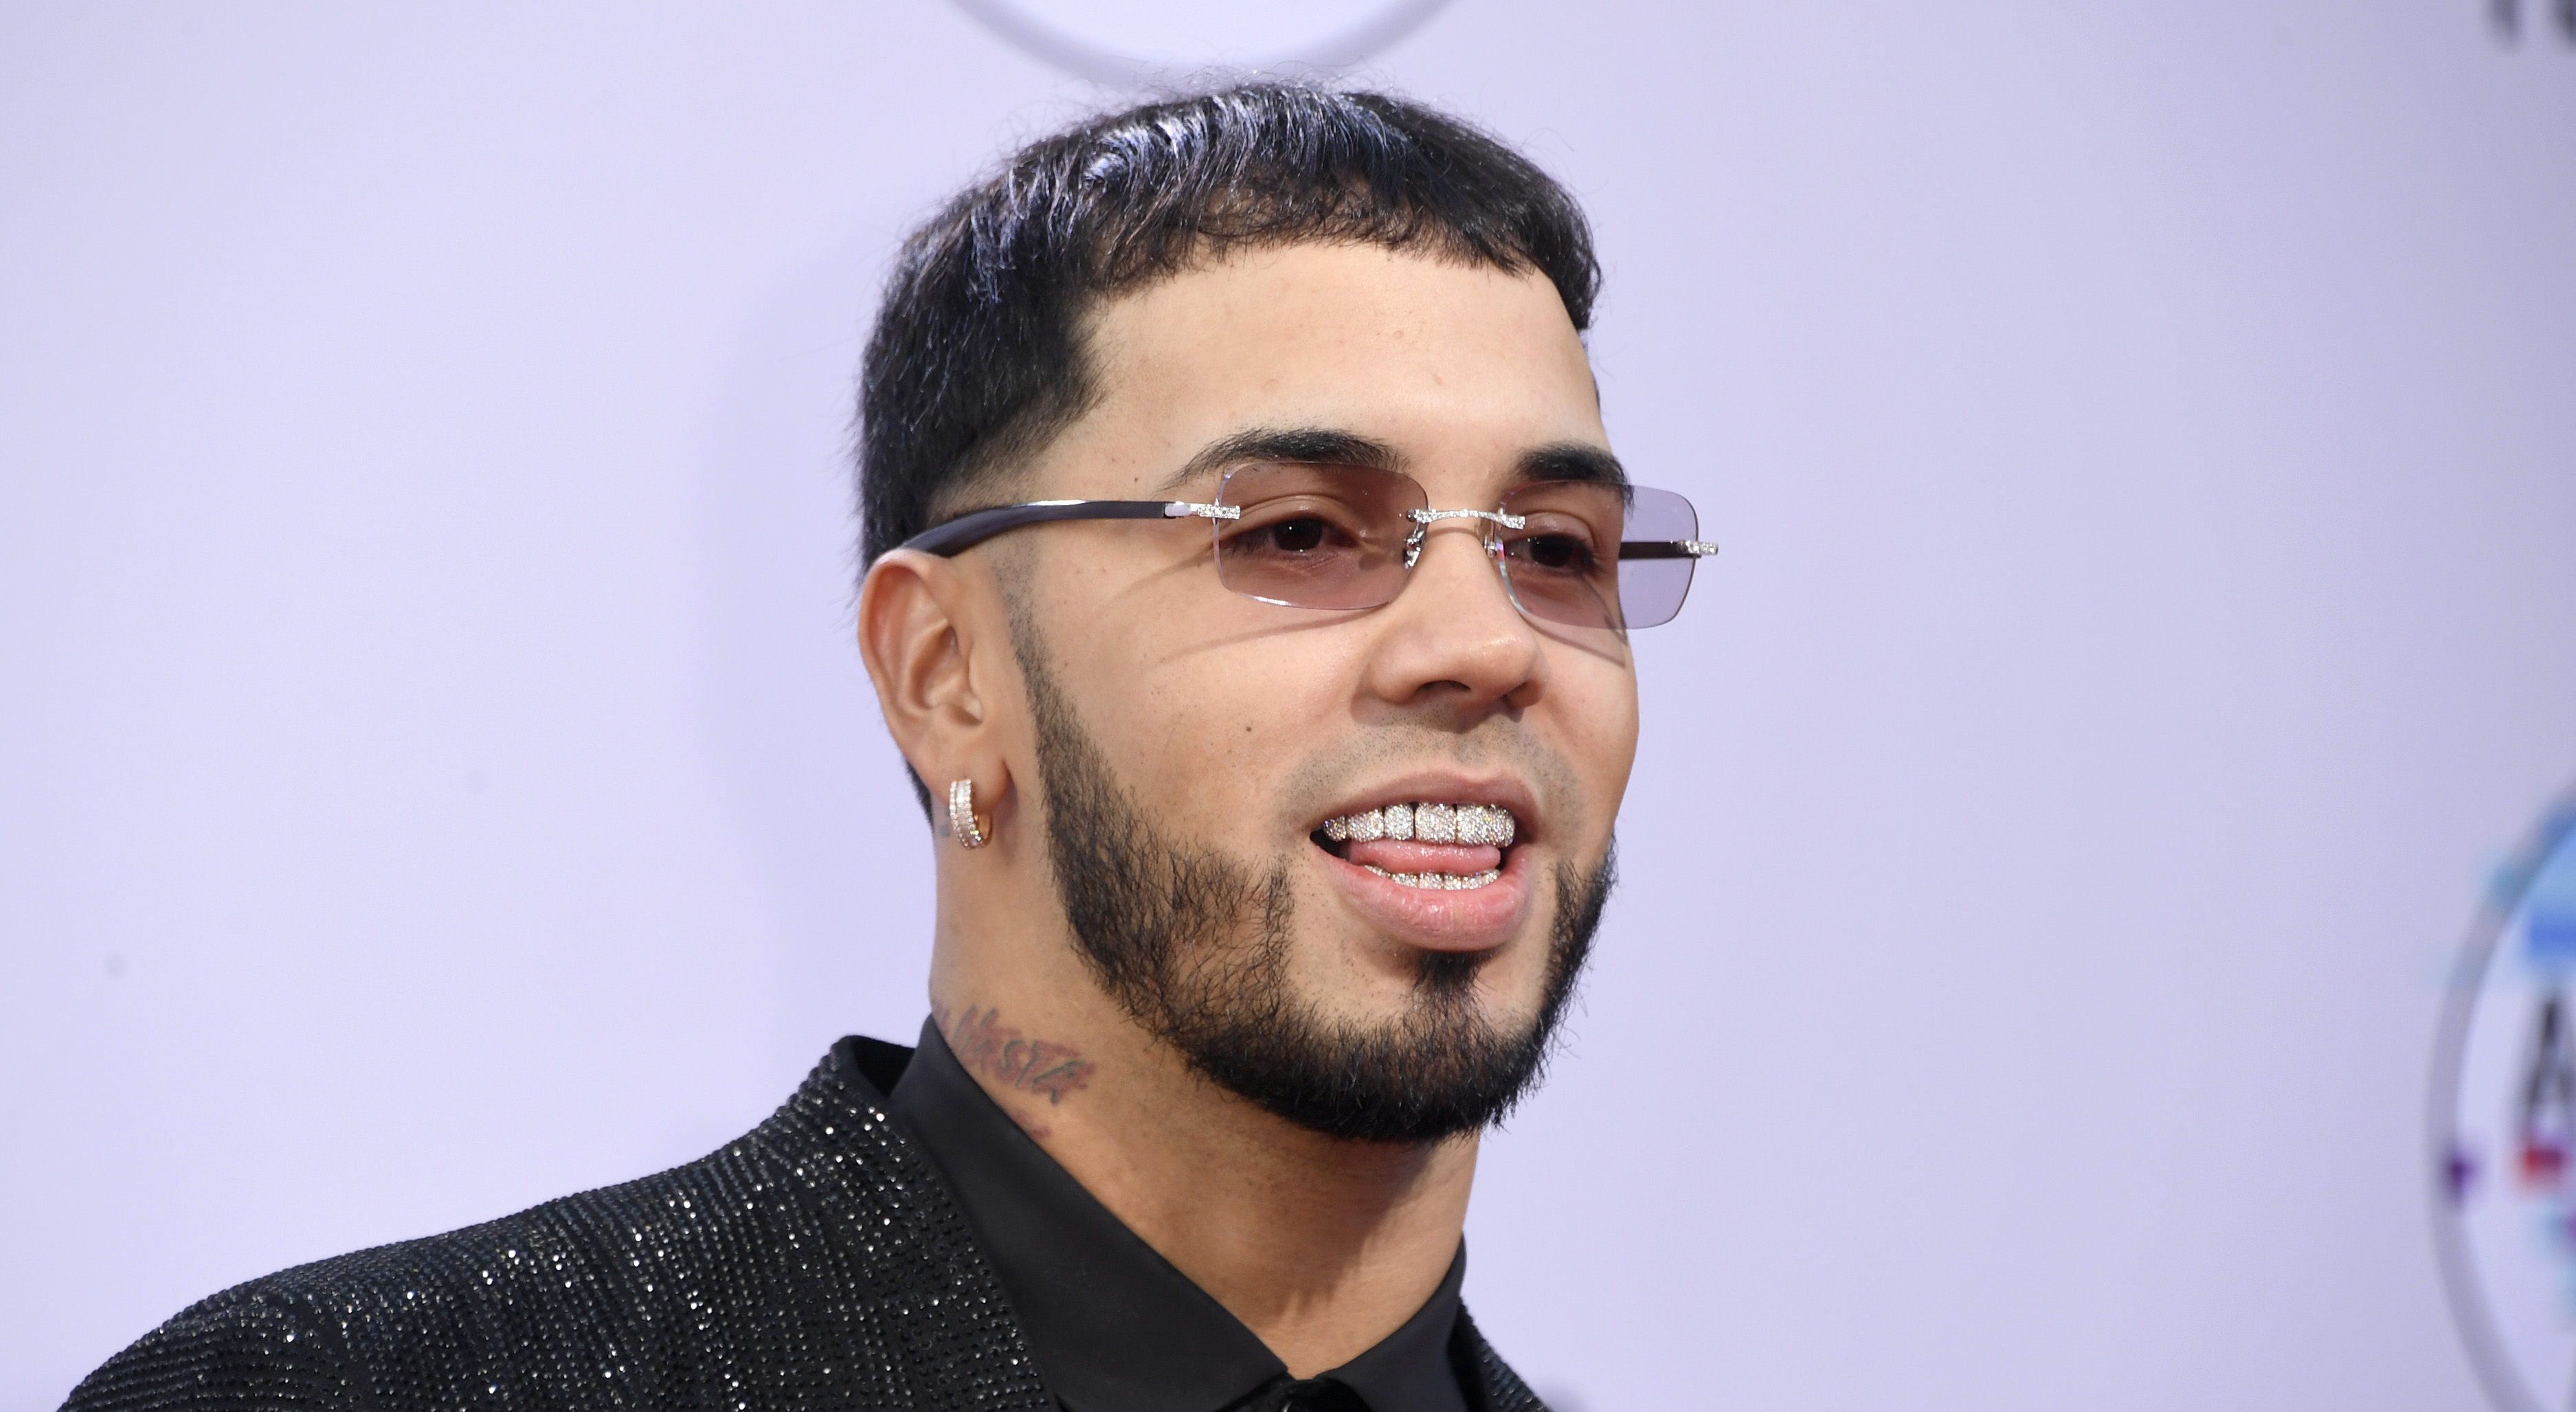 Anuel AA attends the 2019 Latin American Music Awards at Dolby Theatre. Photo by Frazer Harrison/Getty Images